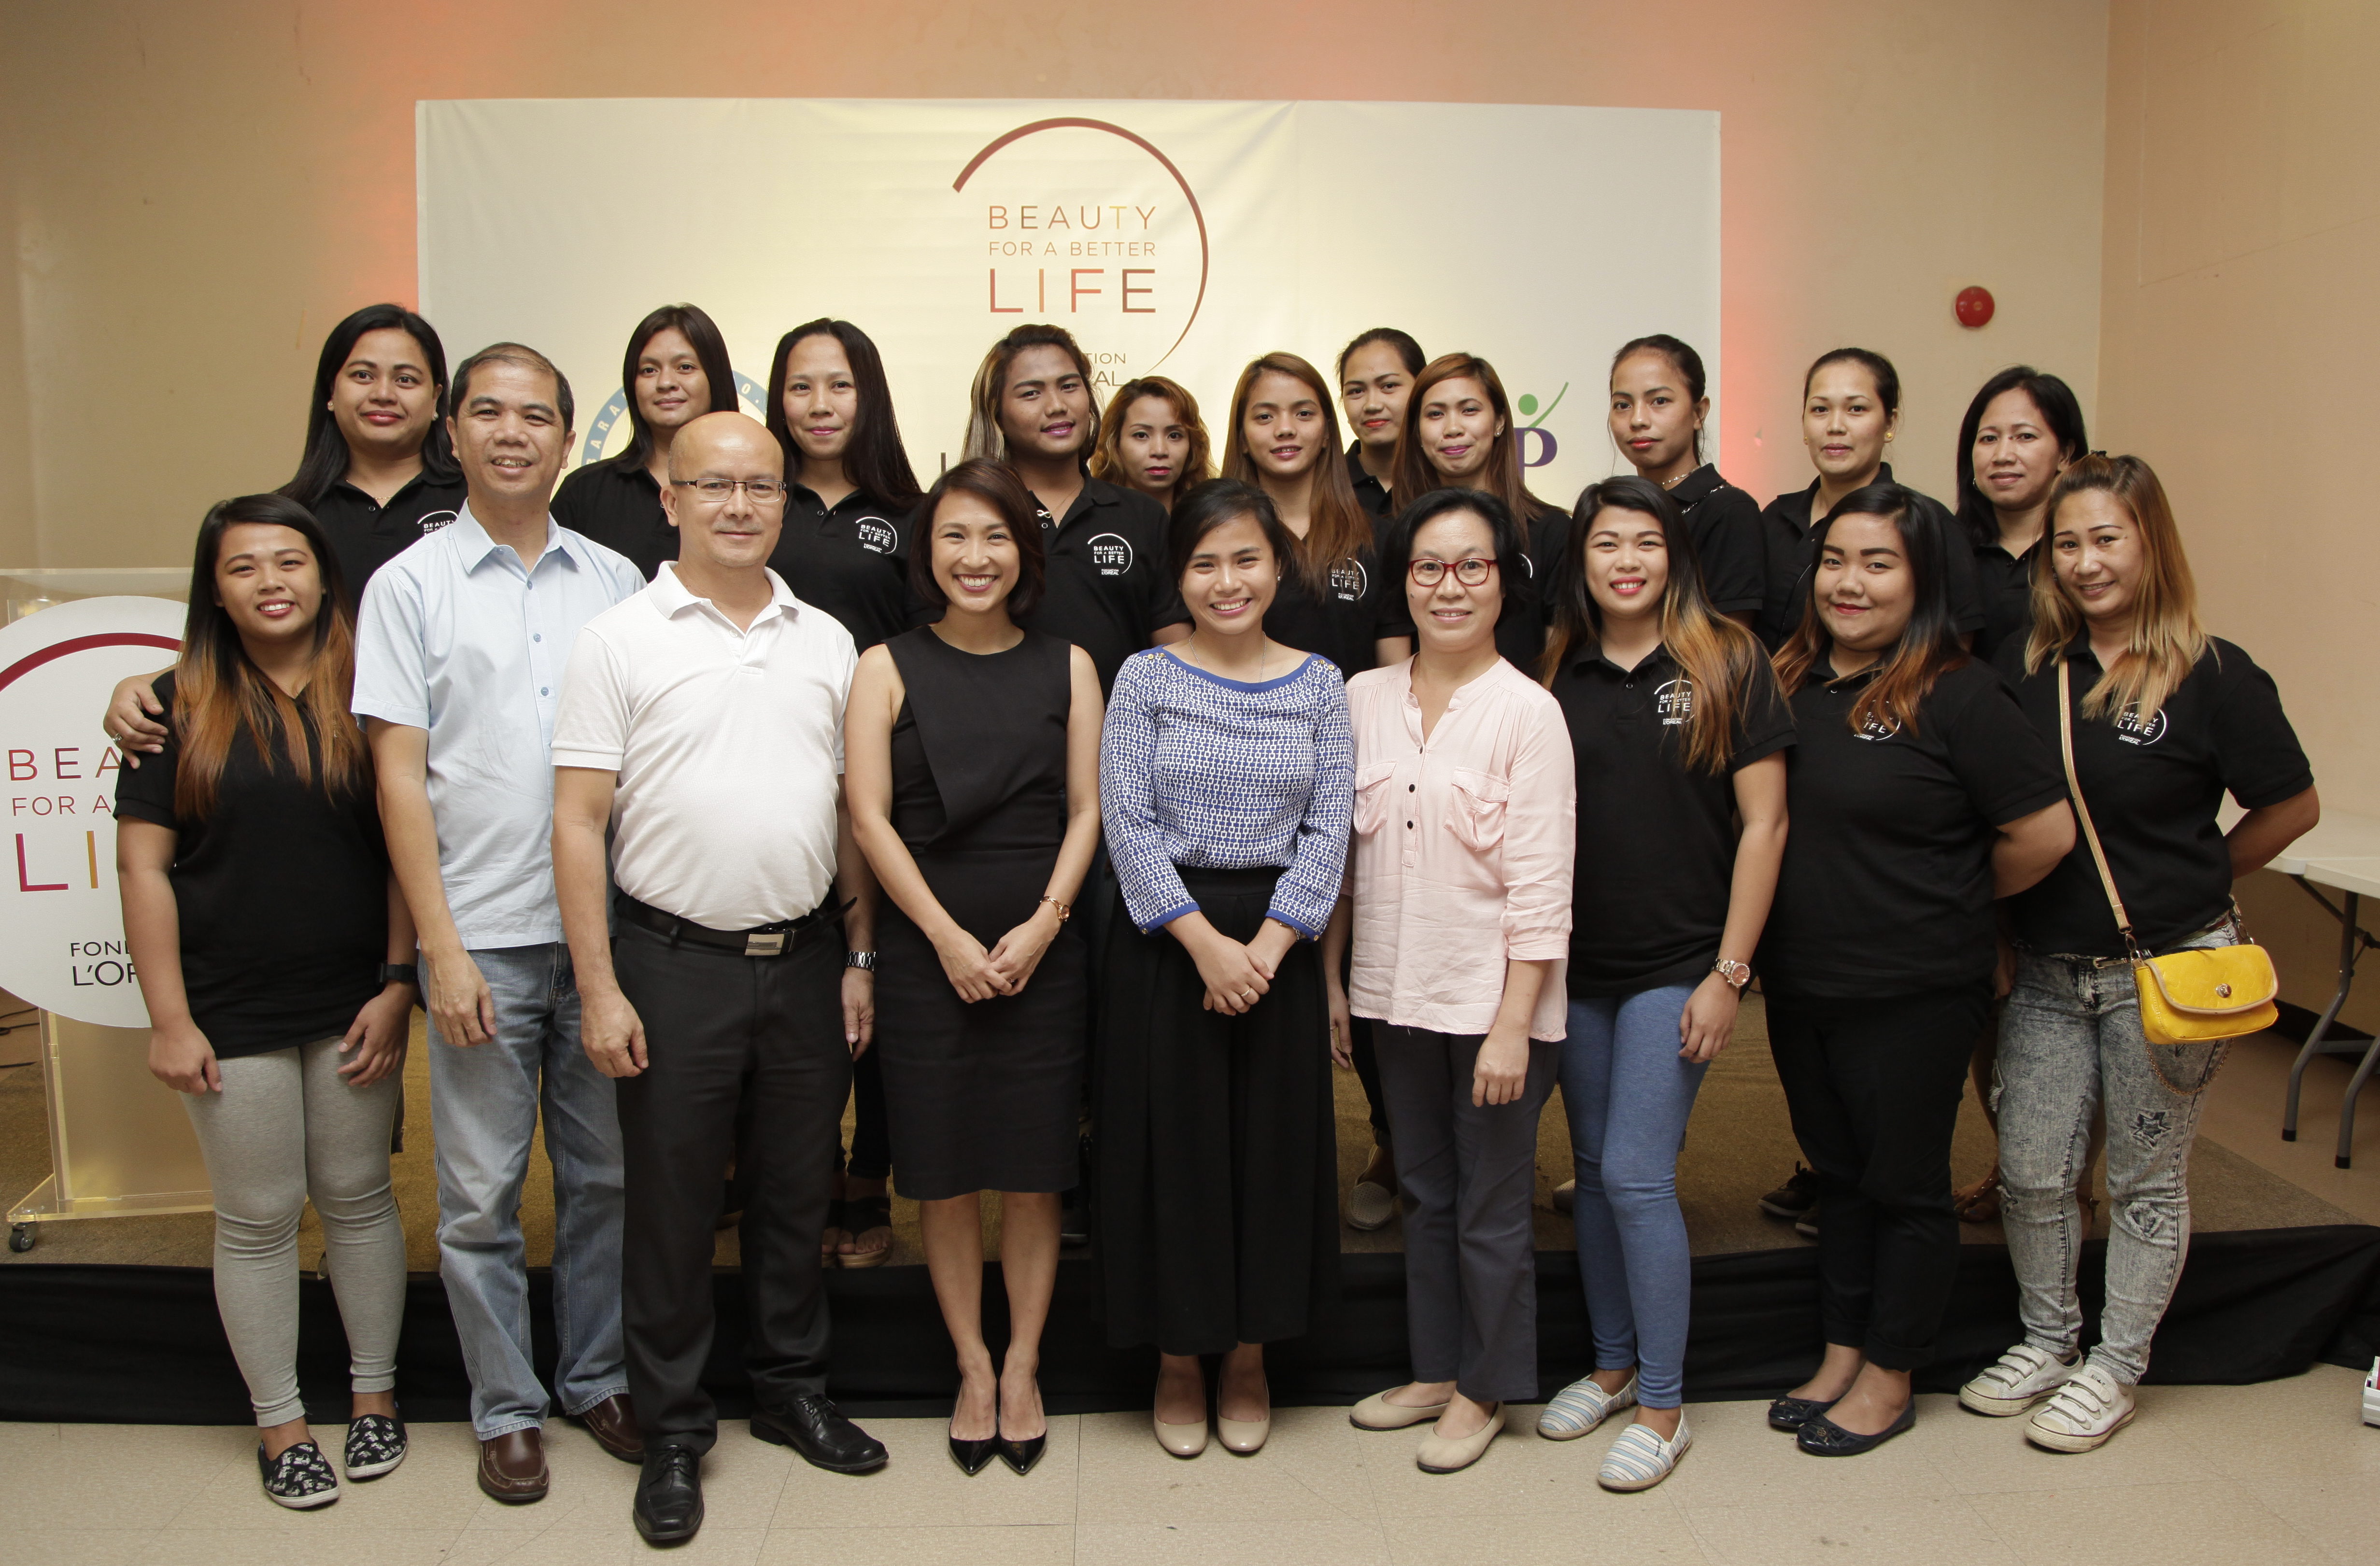 L’oreal Gives Back Through the ‘Beauty for a Better Life’ Program